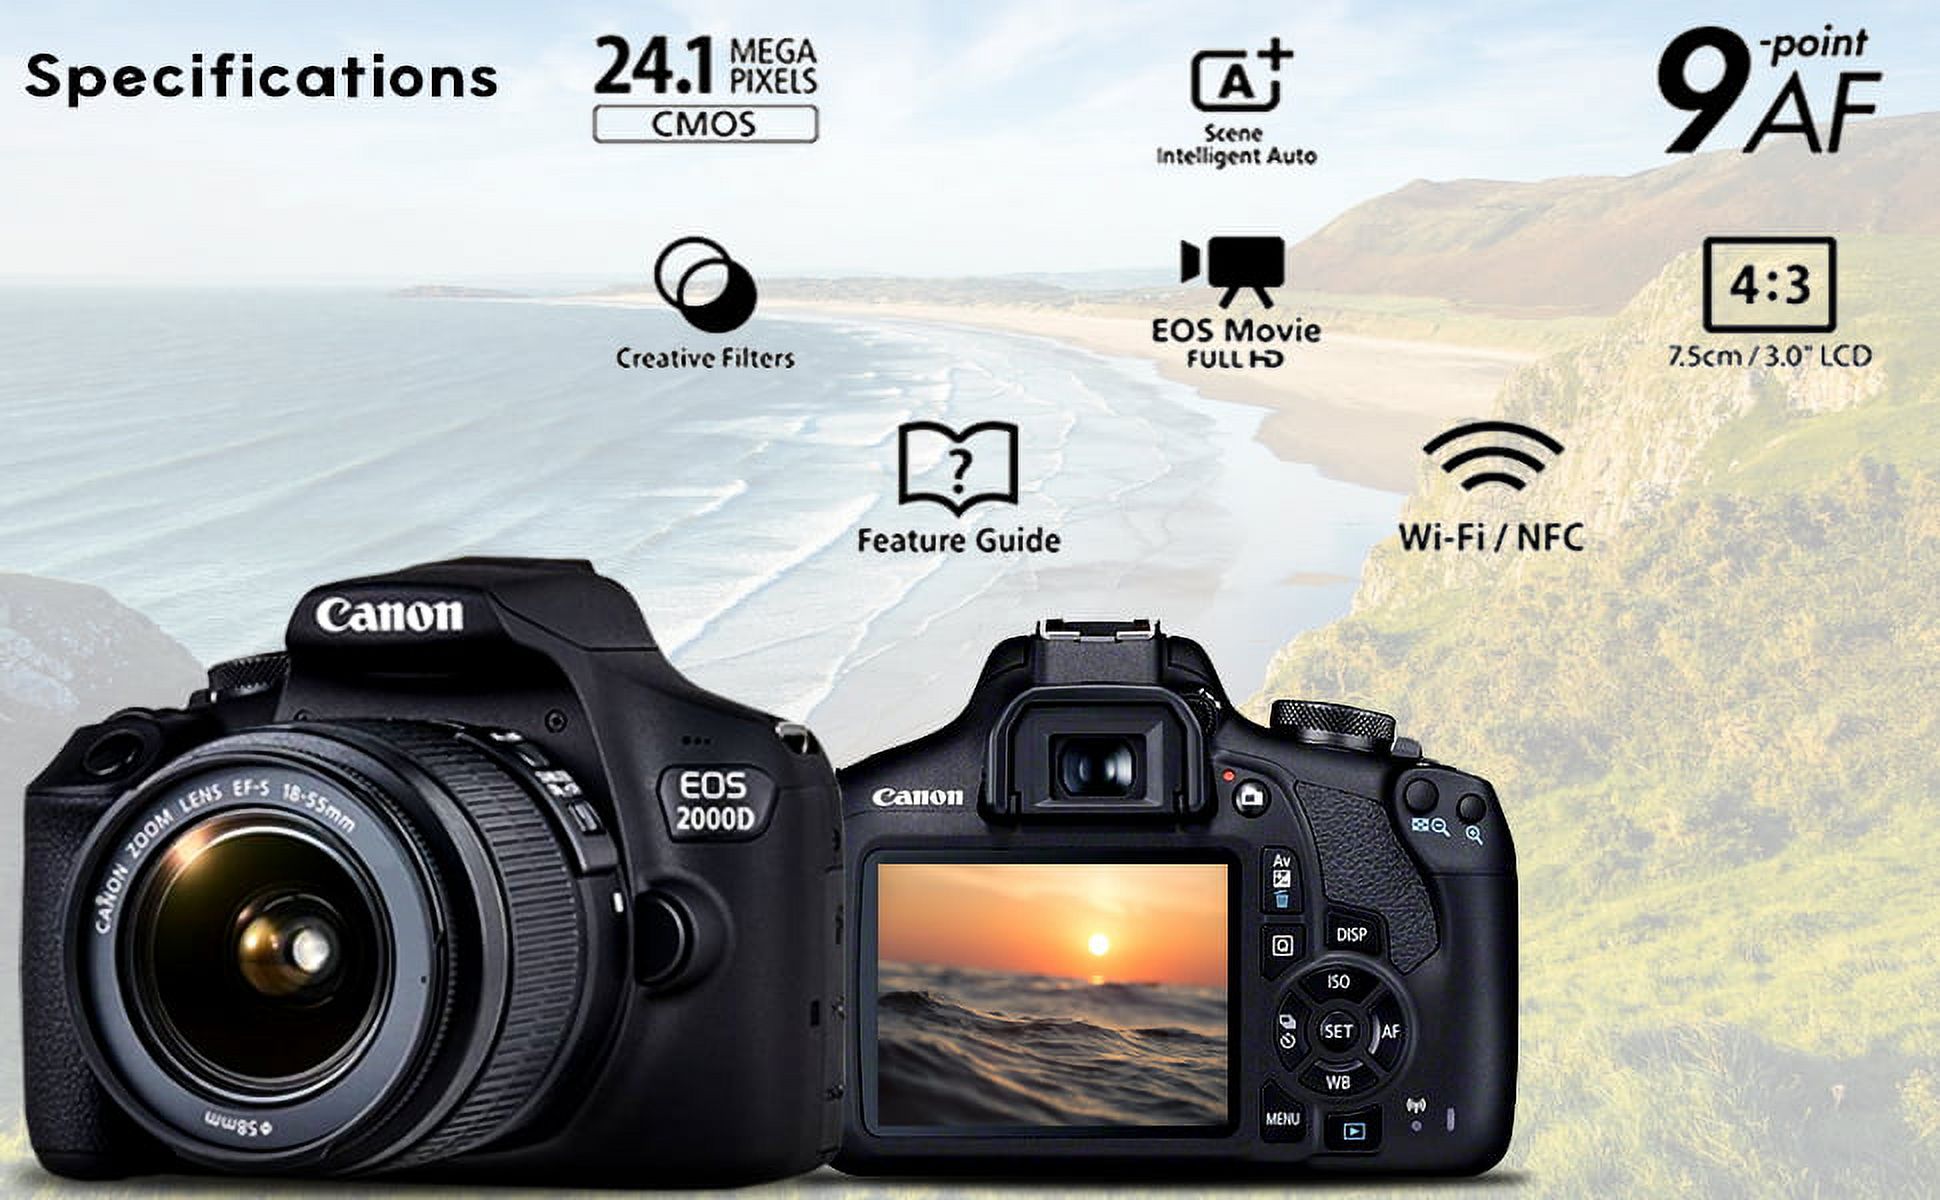 Canon EOS 2000D / Rebel T7 DSLR Camera With 18-55mm Lens +  Sandisk Extreme Pro 64GB Card + Creative Filters + EOS Camera Bag + Cleaning Set, + More (International Model) - image 3 of 6